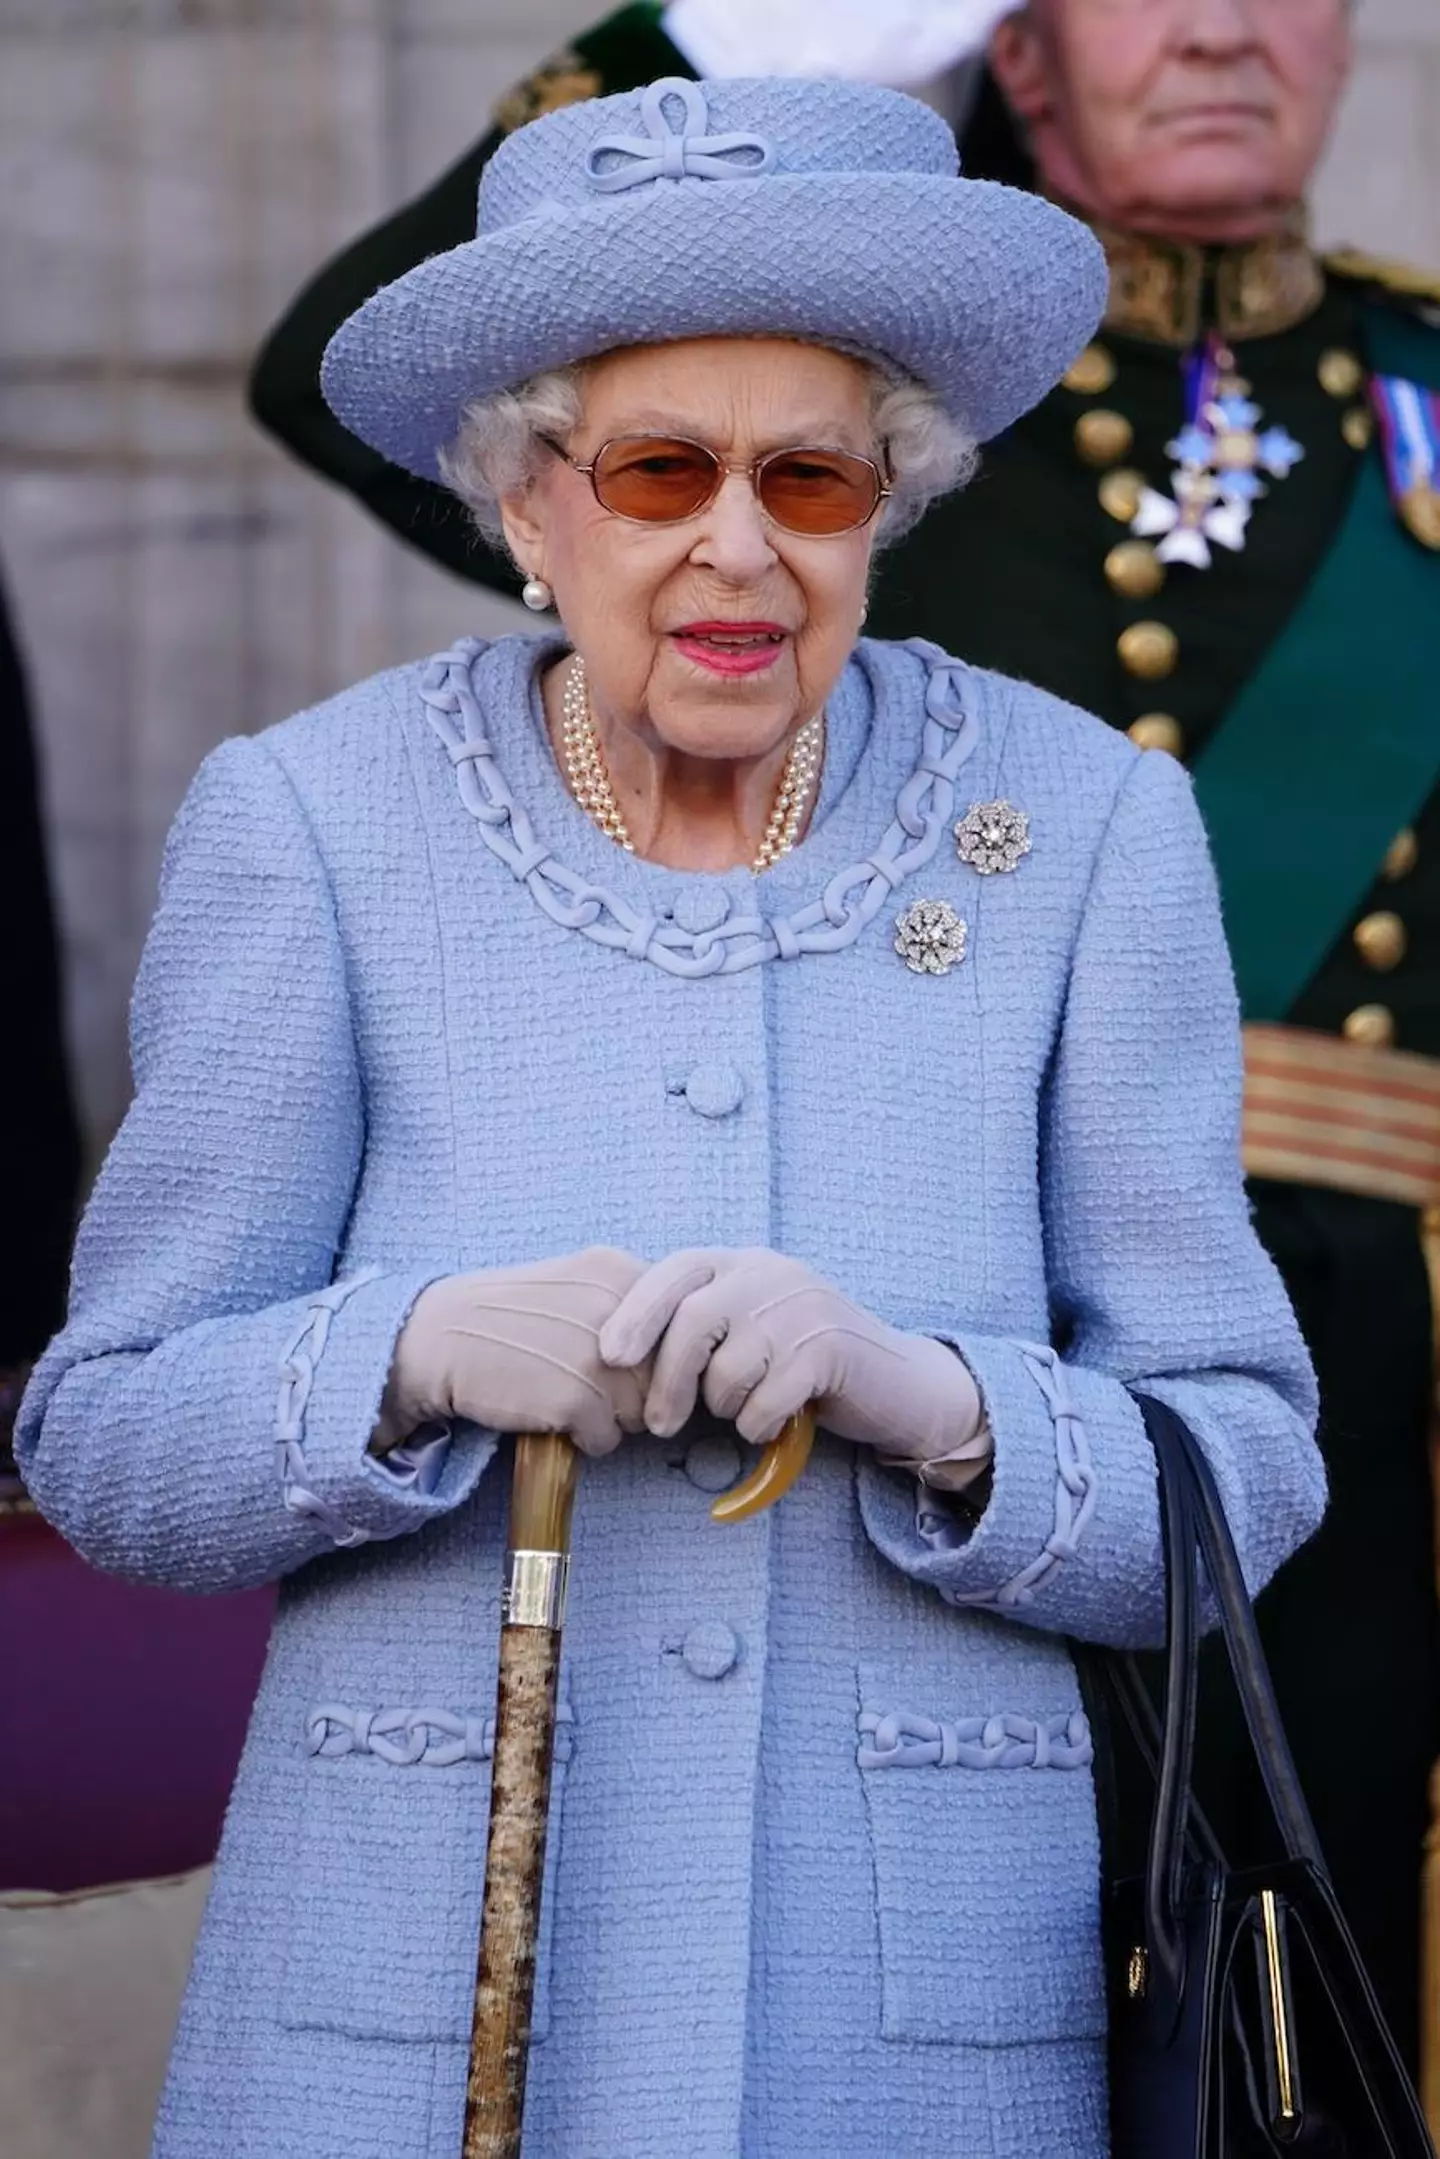 The Queen passed away peacefully at the age of 96.